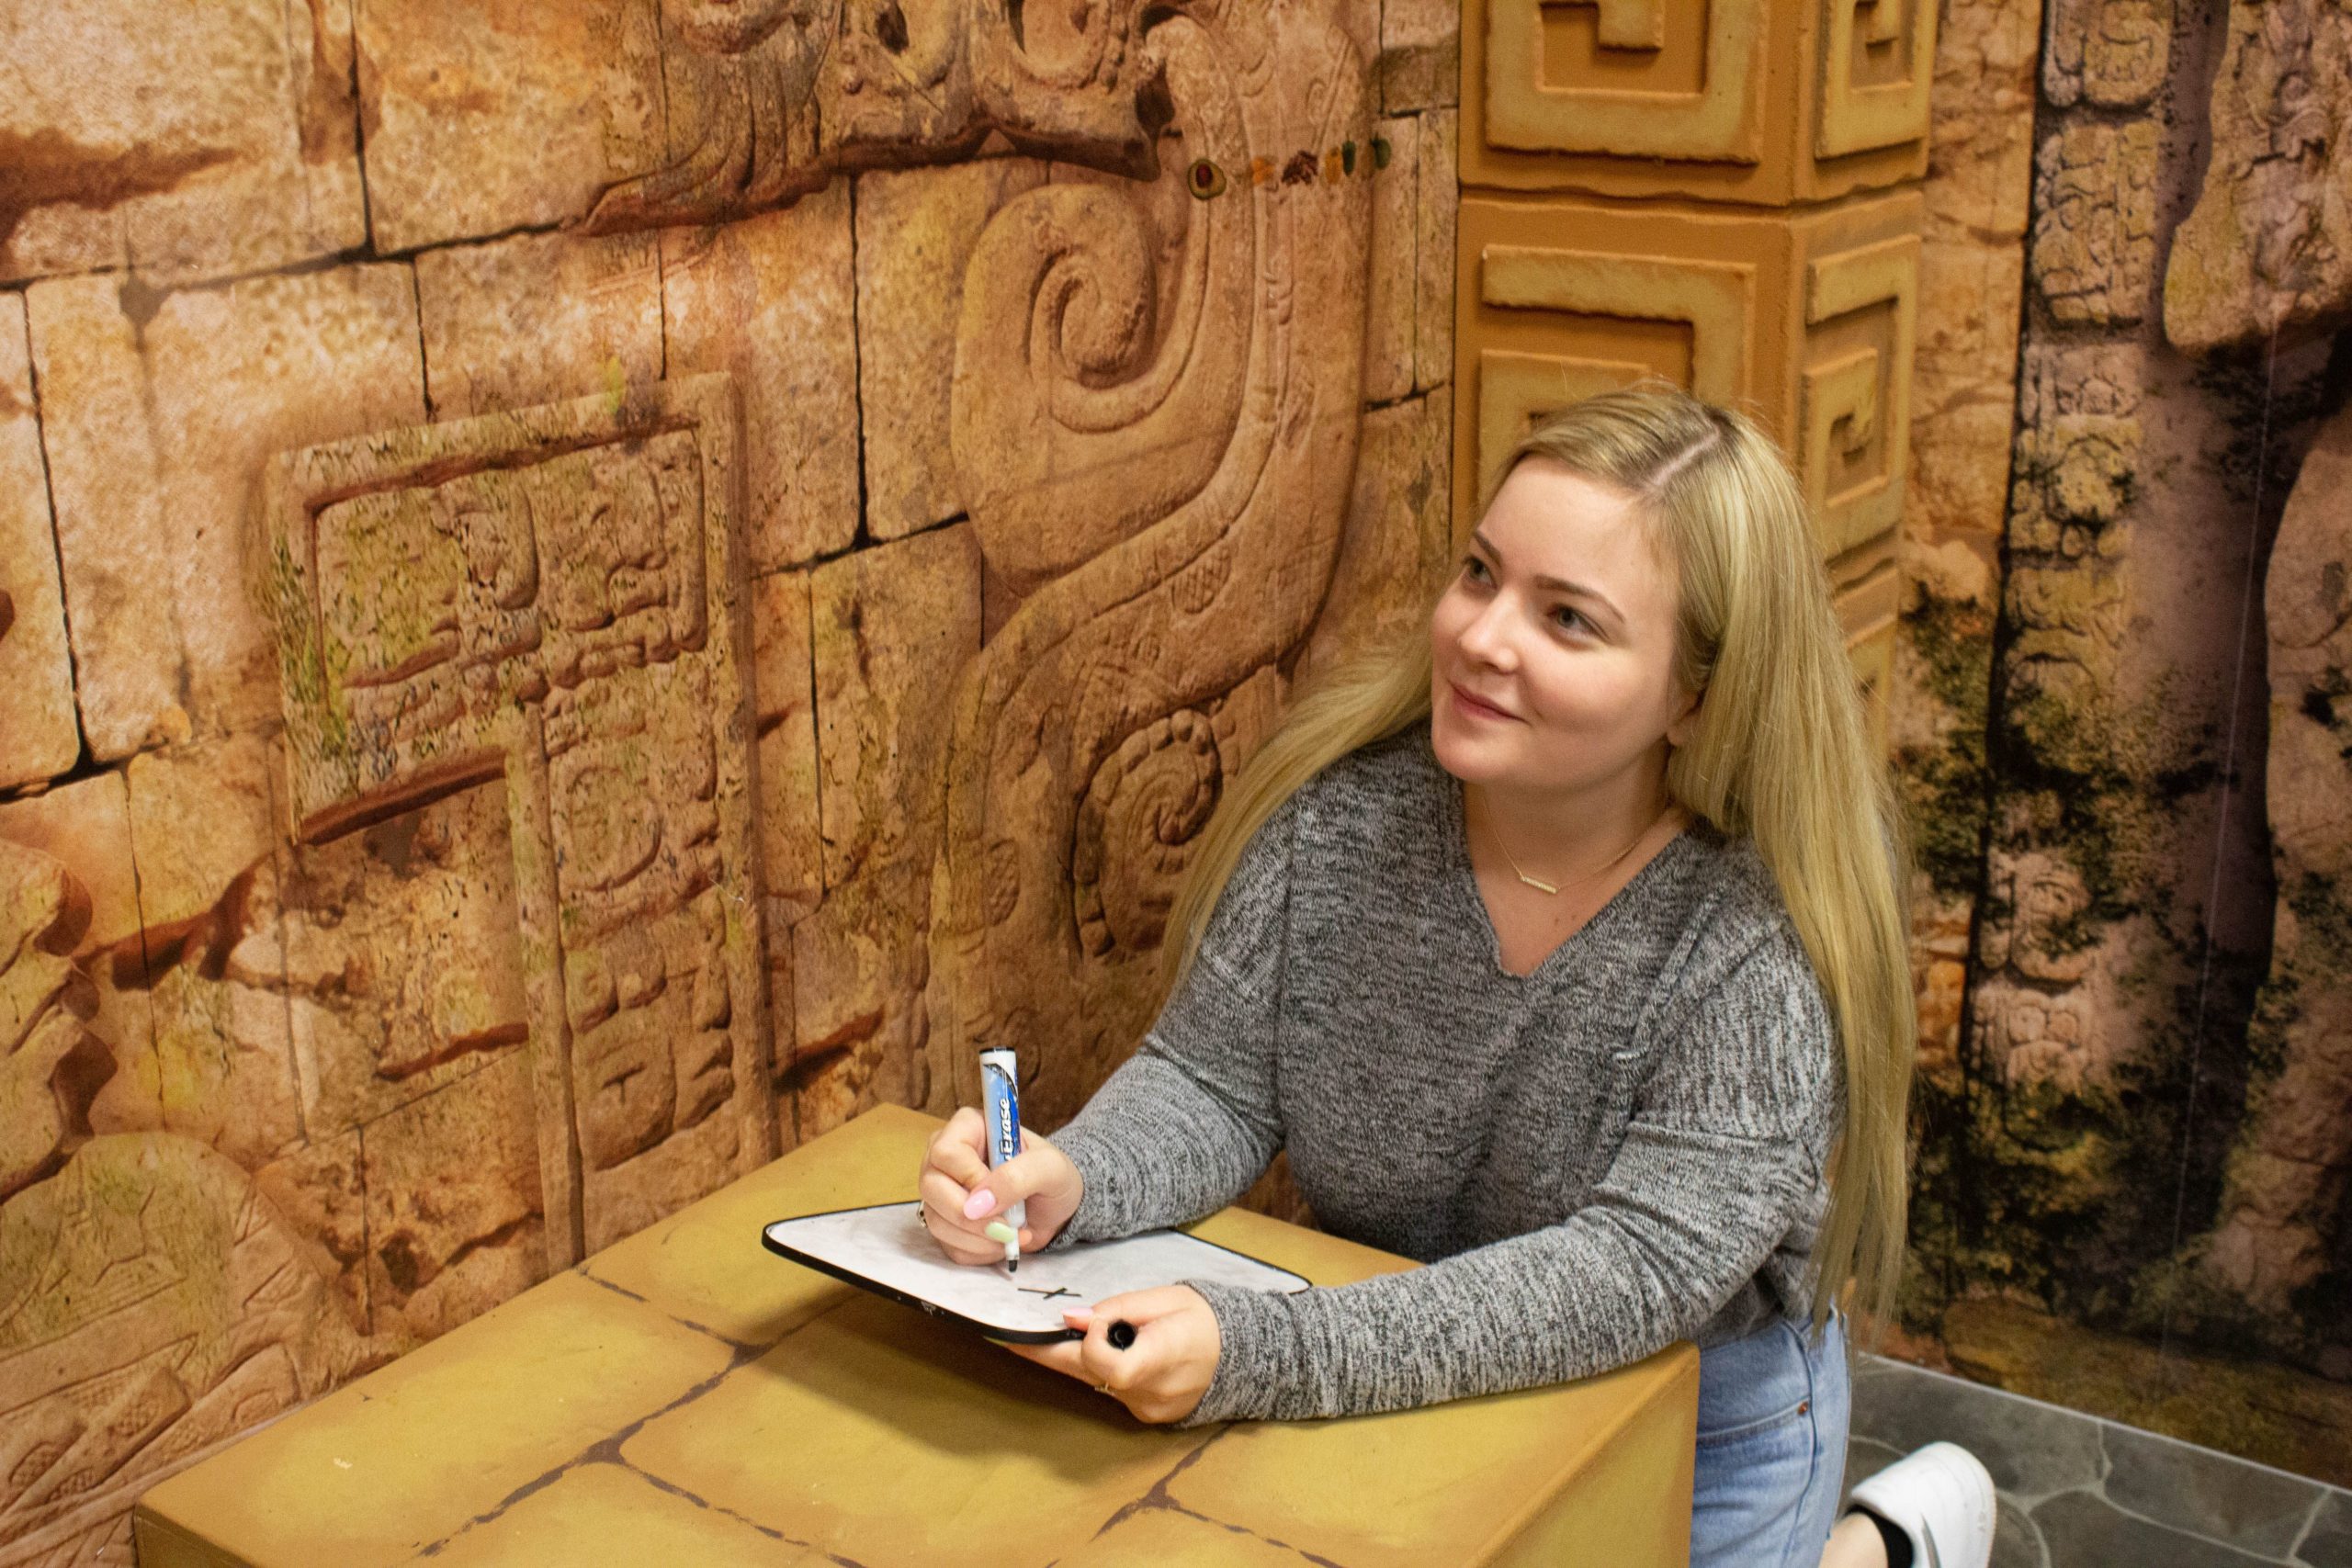 Woman, participating in tomb of the red queen escape from taking notes to solve puzzle